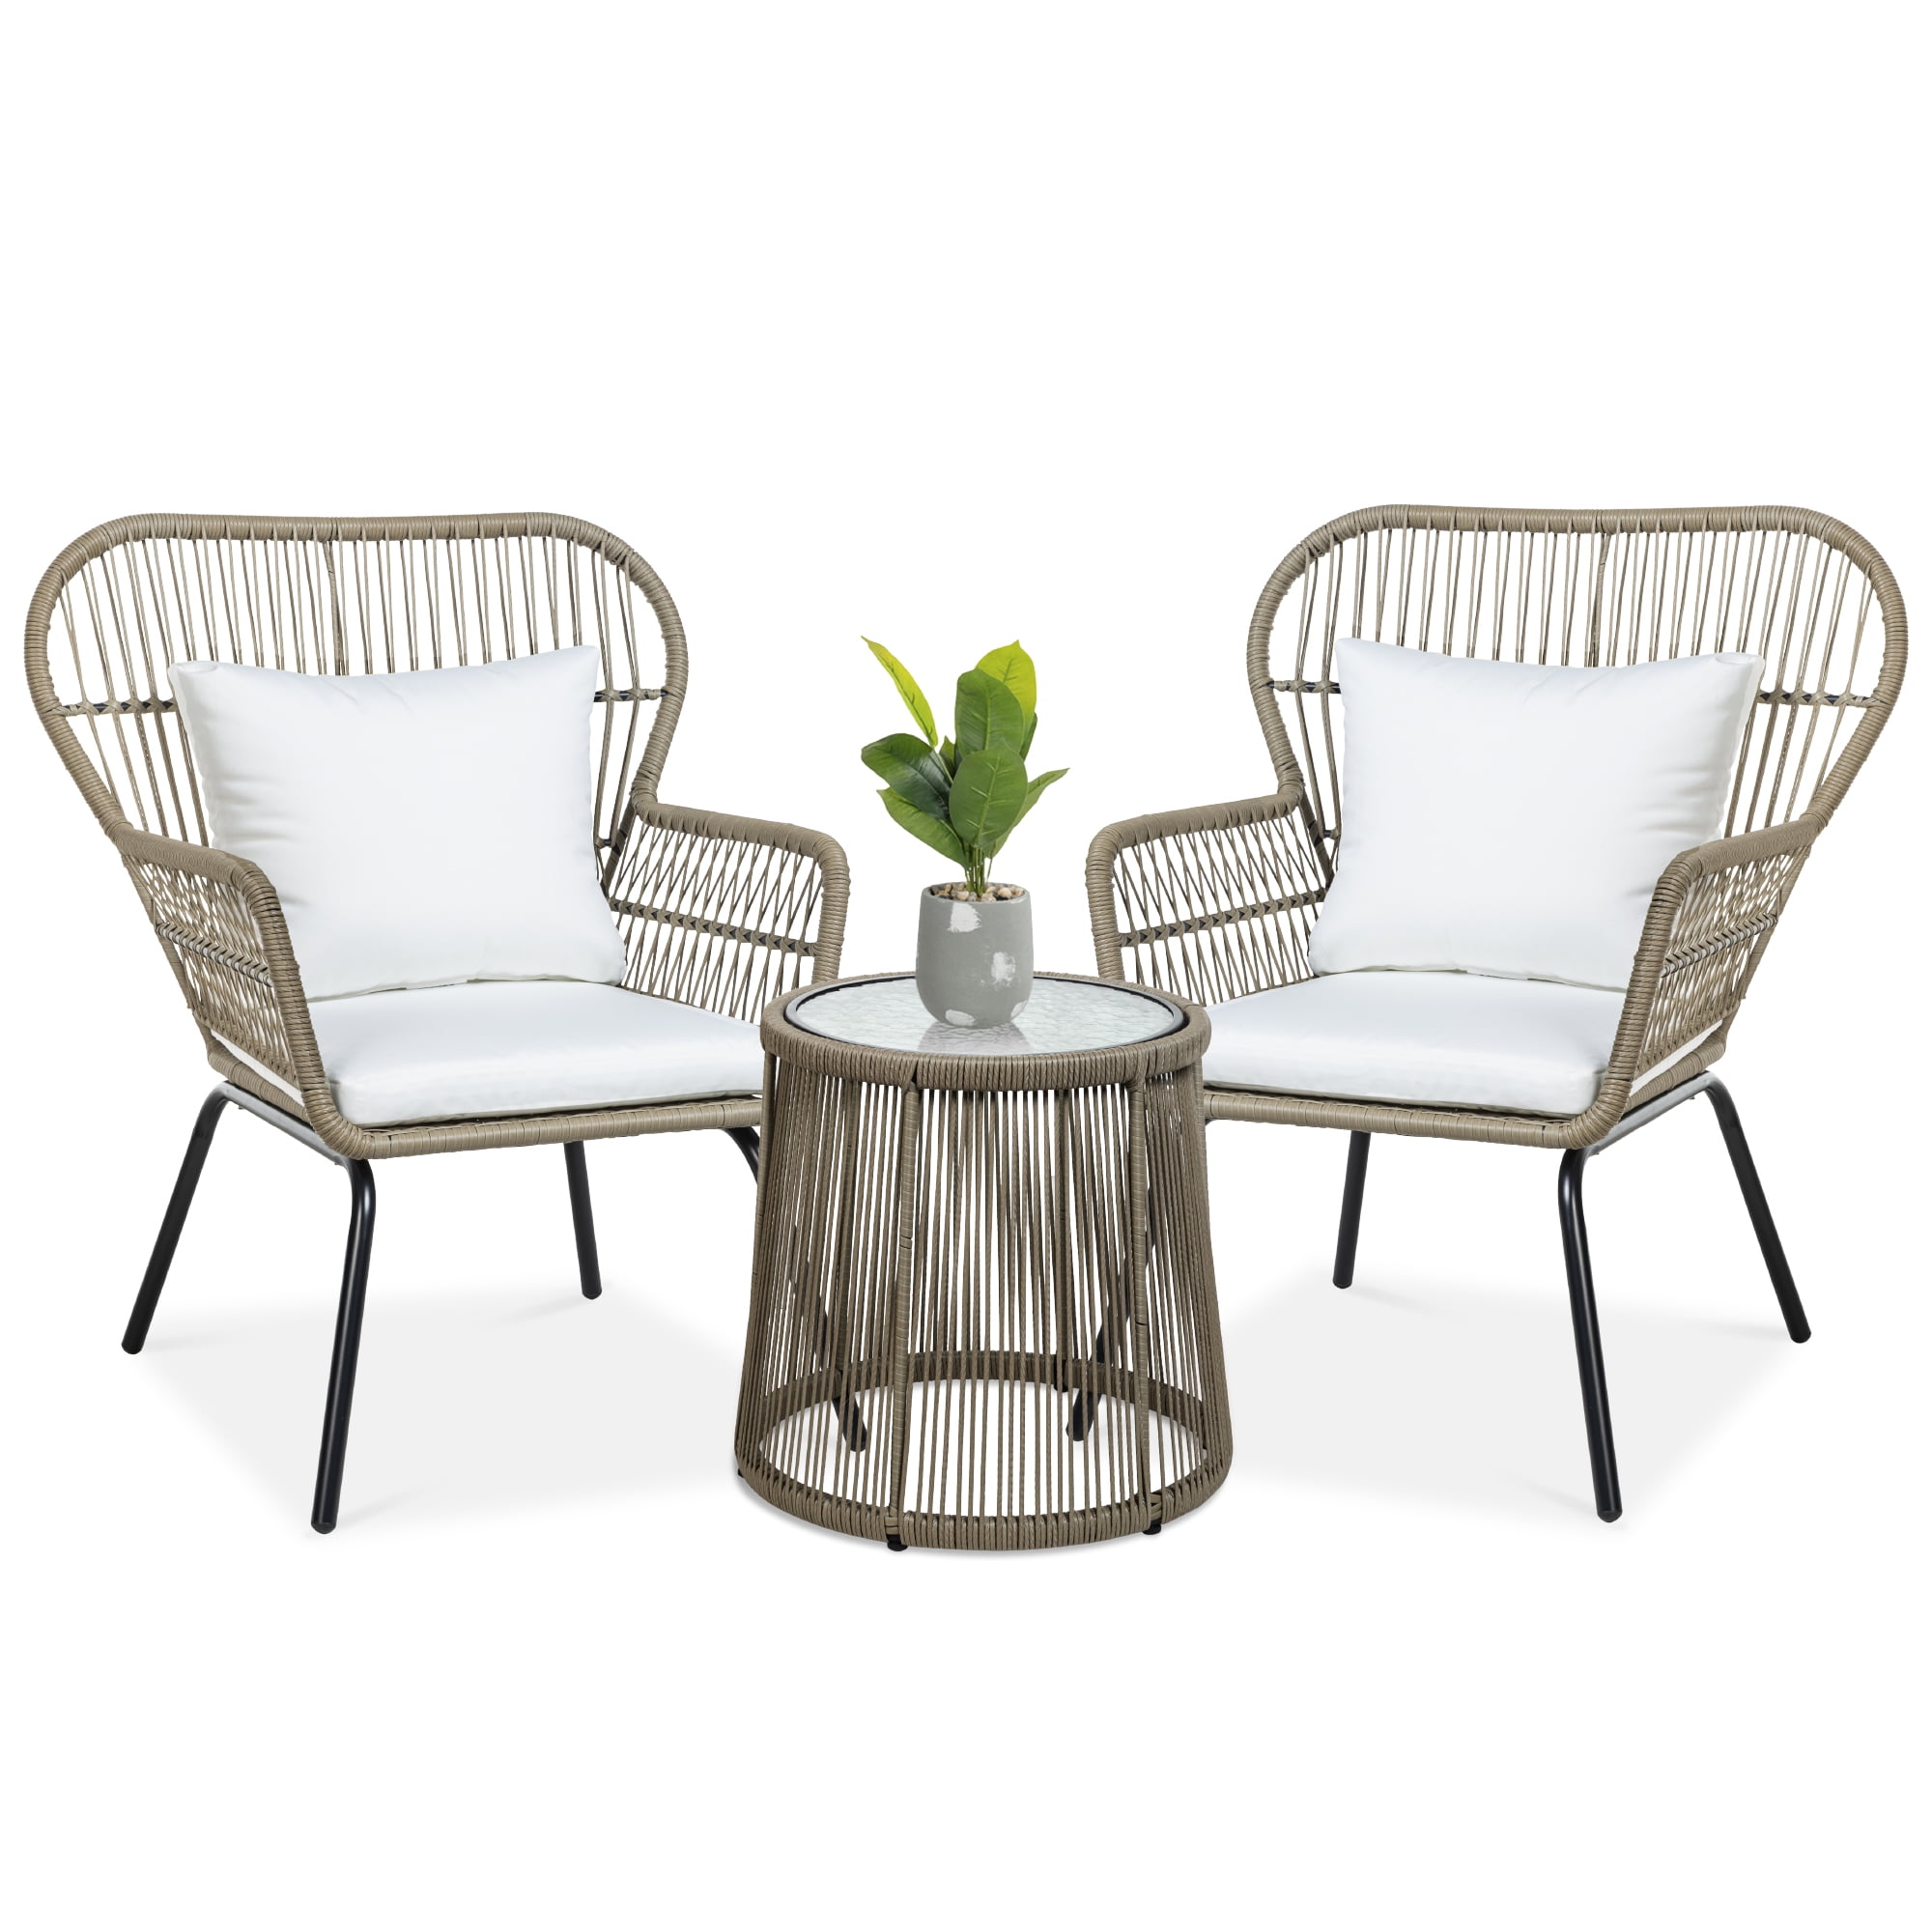 3 Piece Patio Set-Outdoor Chairs with Side Table,Wicker Patio Furniture Sets Modern Bistro Set for Yard and Bistro 